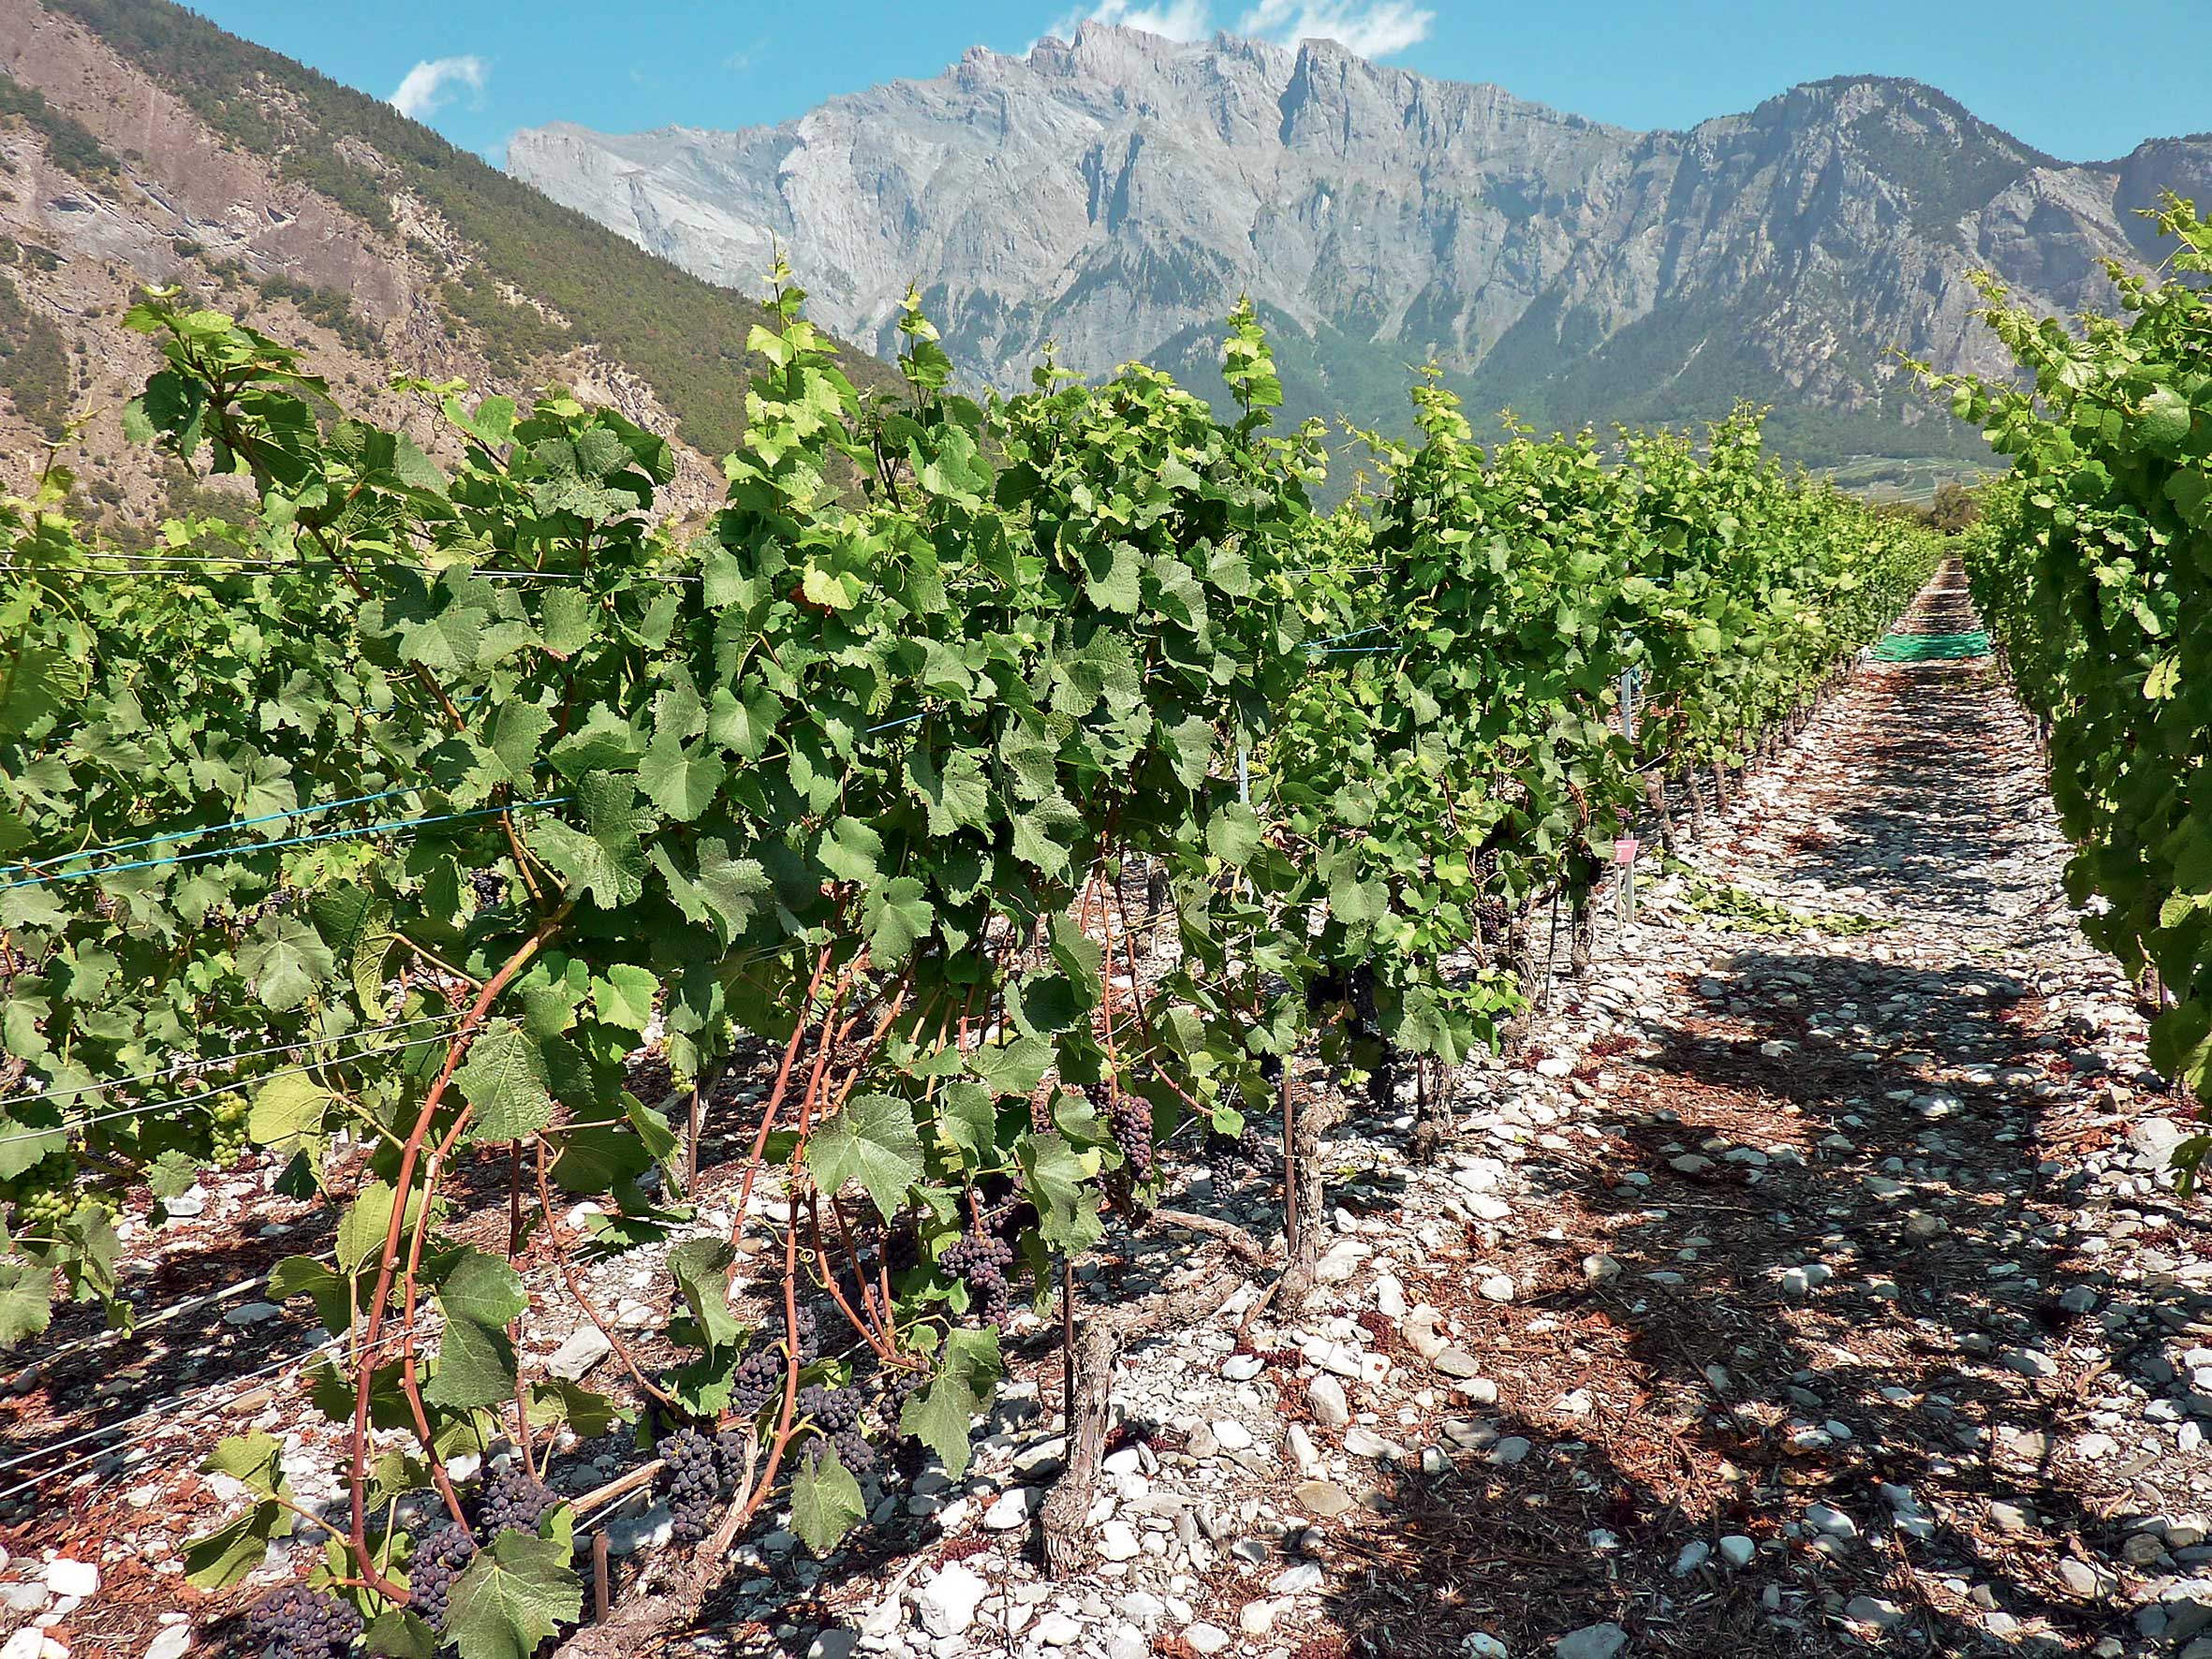 Influence of the Rootstock on the Performance of the Pinot Noir Grape Variety under Conditions in Central Valais